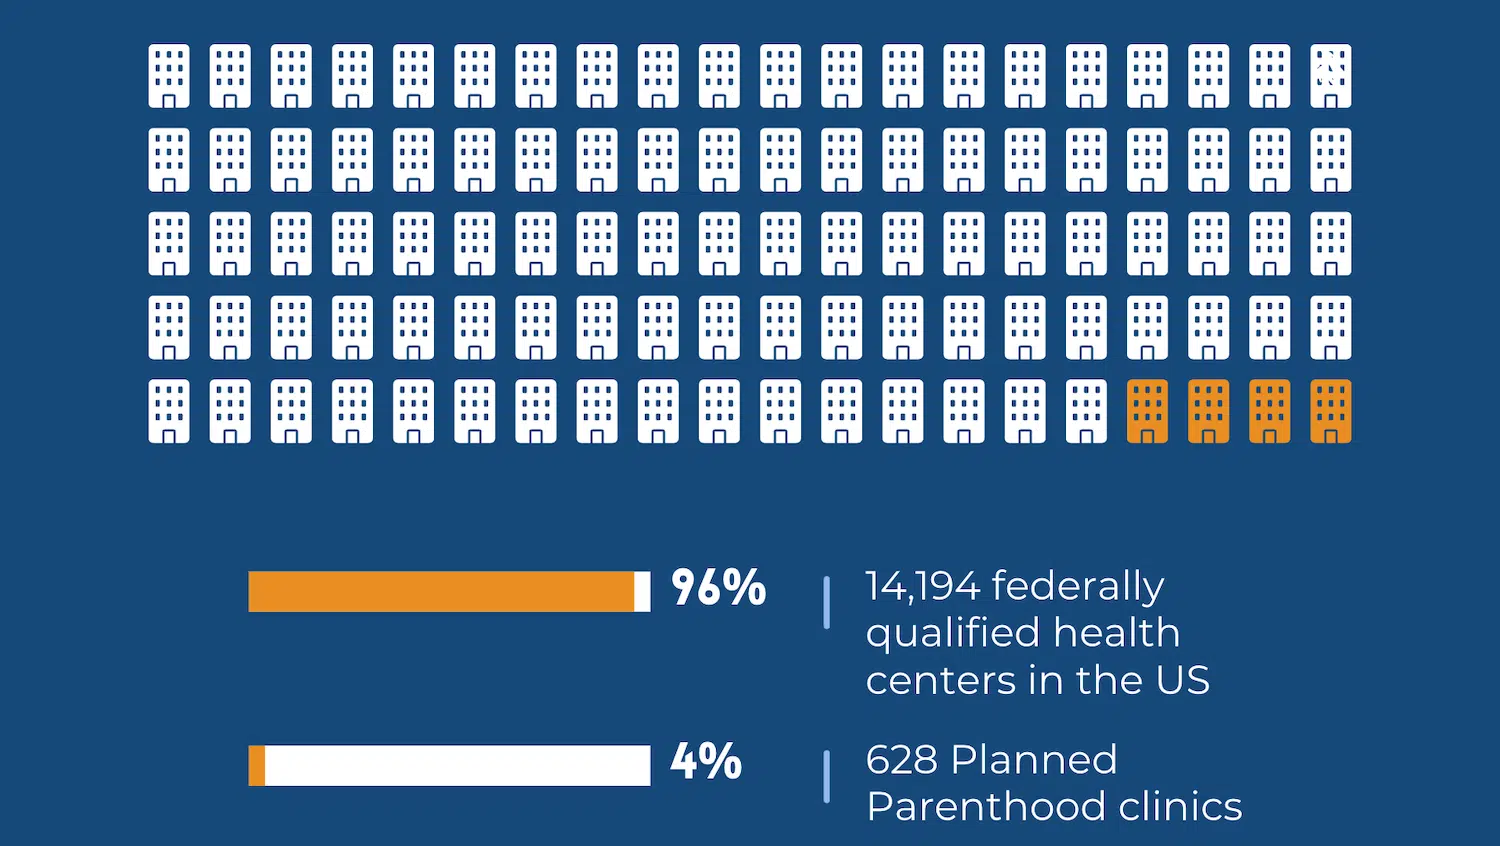 number of planned parenthood clinics and federally qualified health centers in the US